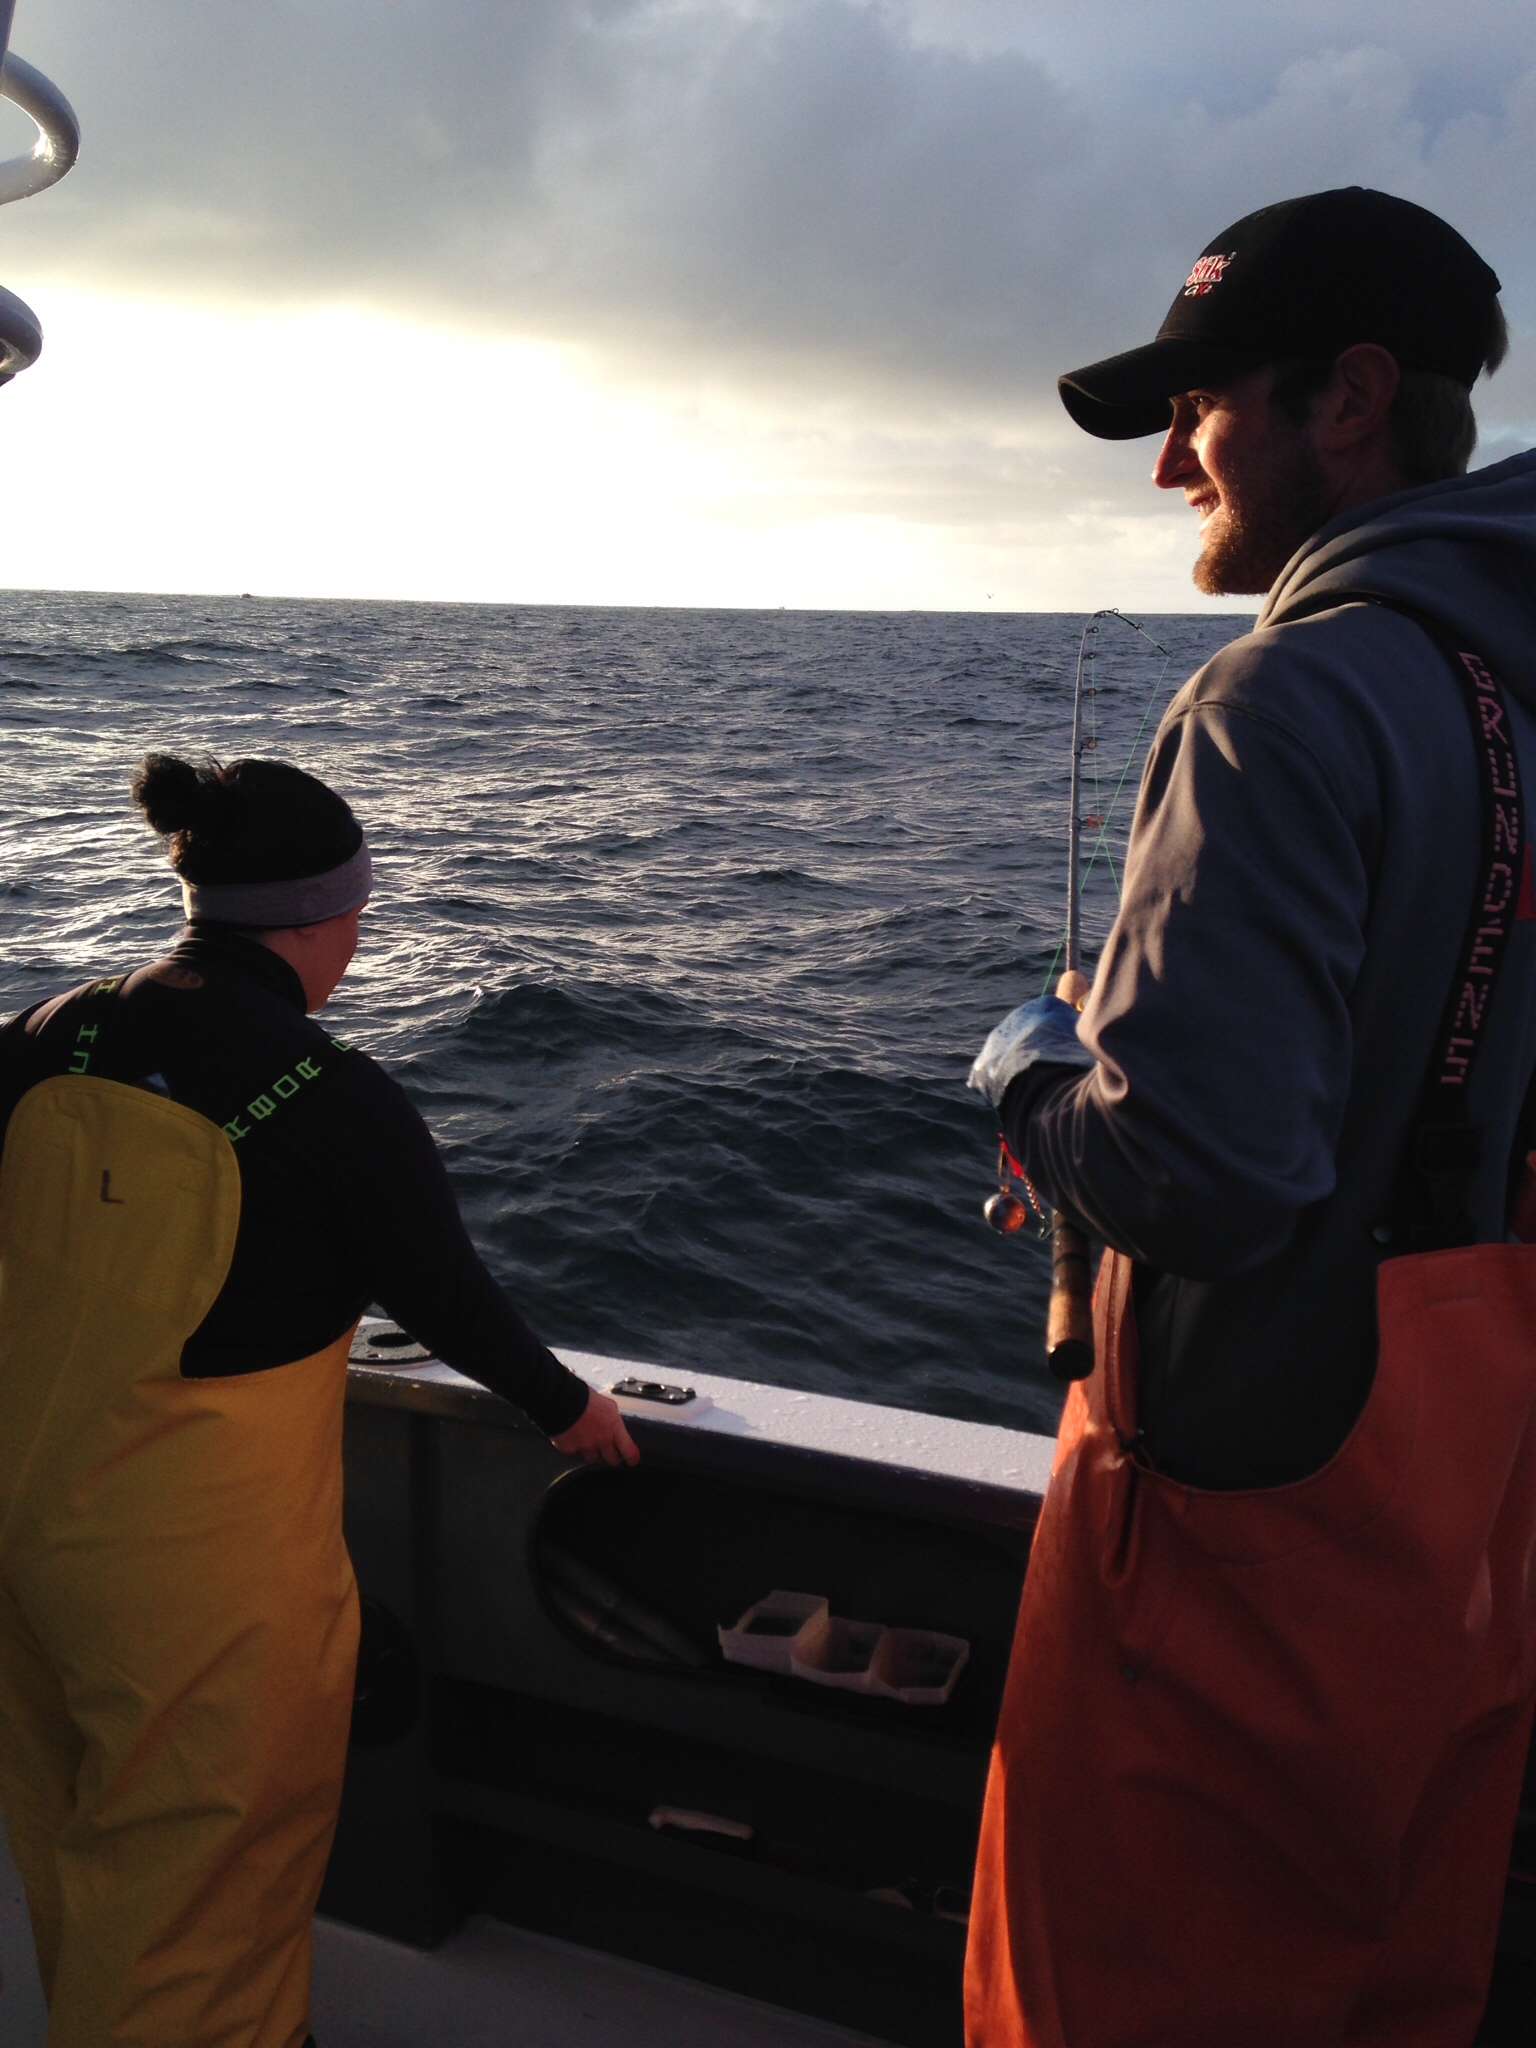 Elizabeth Erickson getting ready to tackle some silver salmon with help from first mate Kyle.